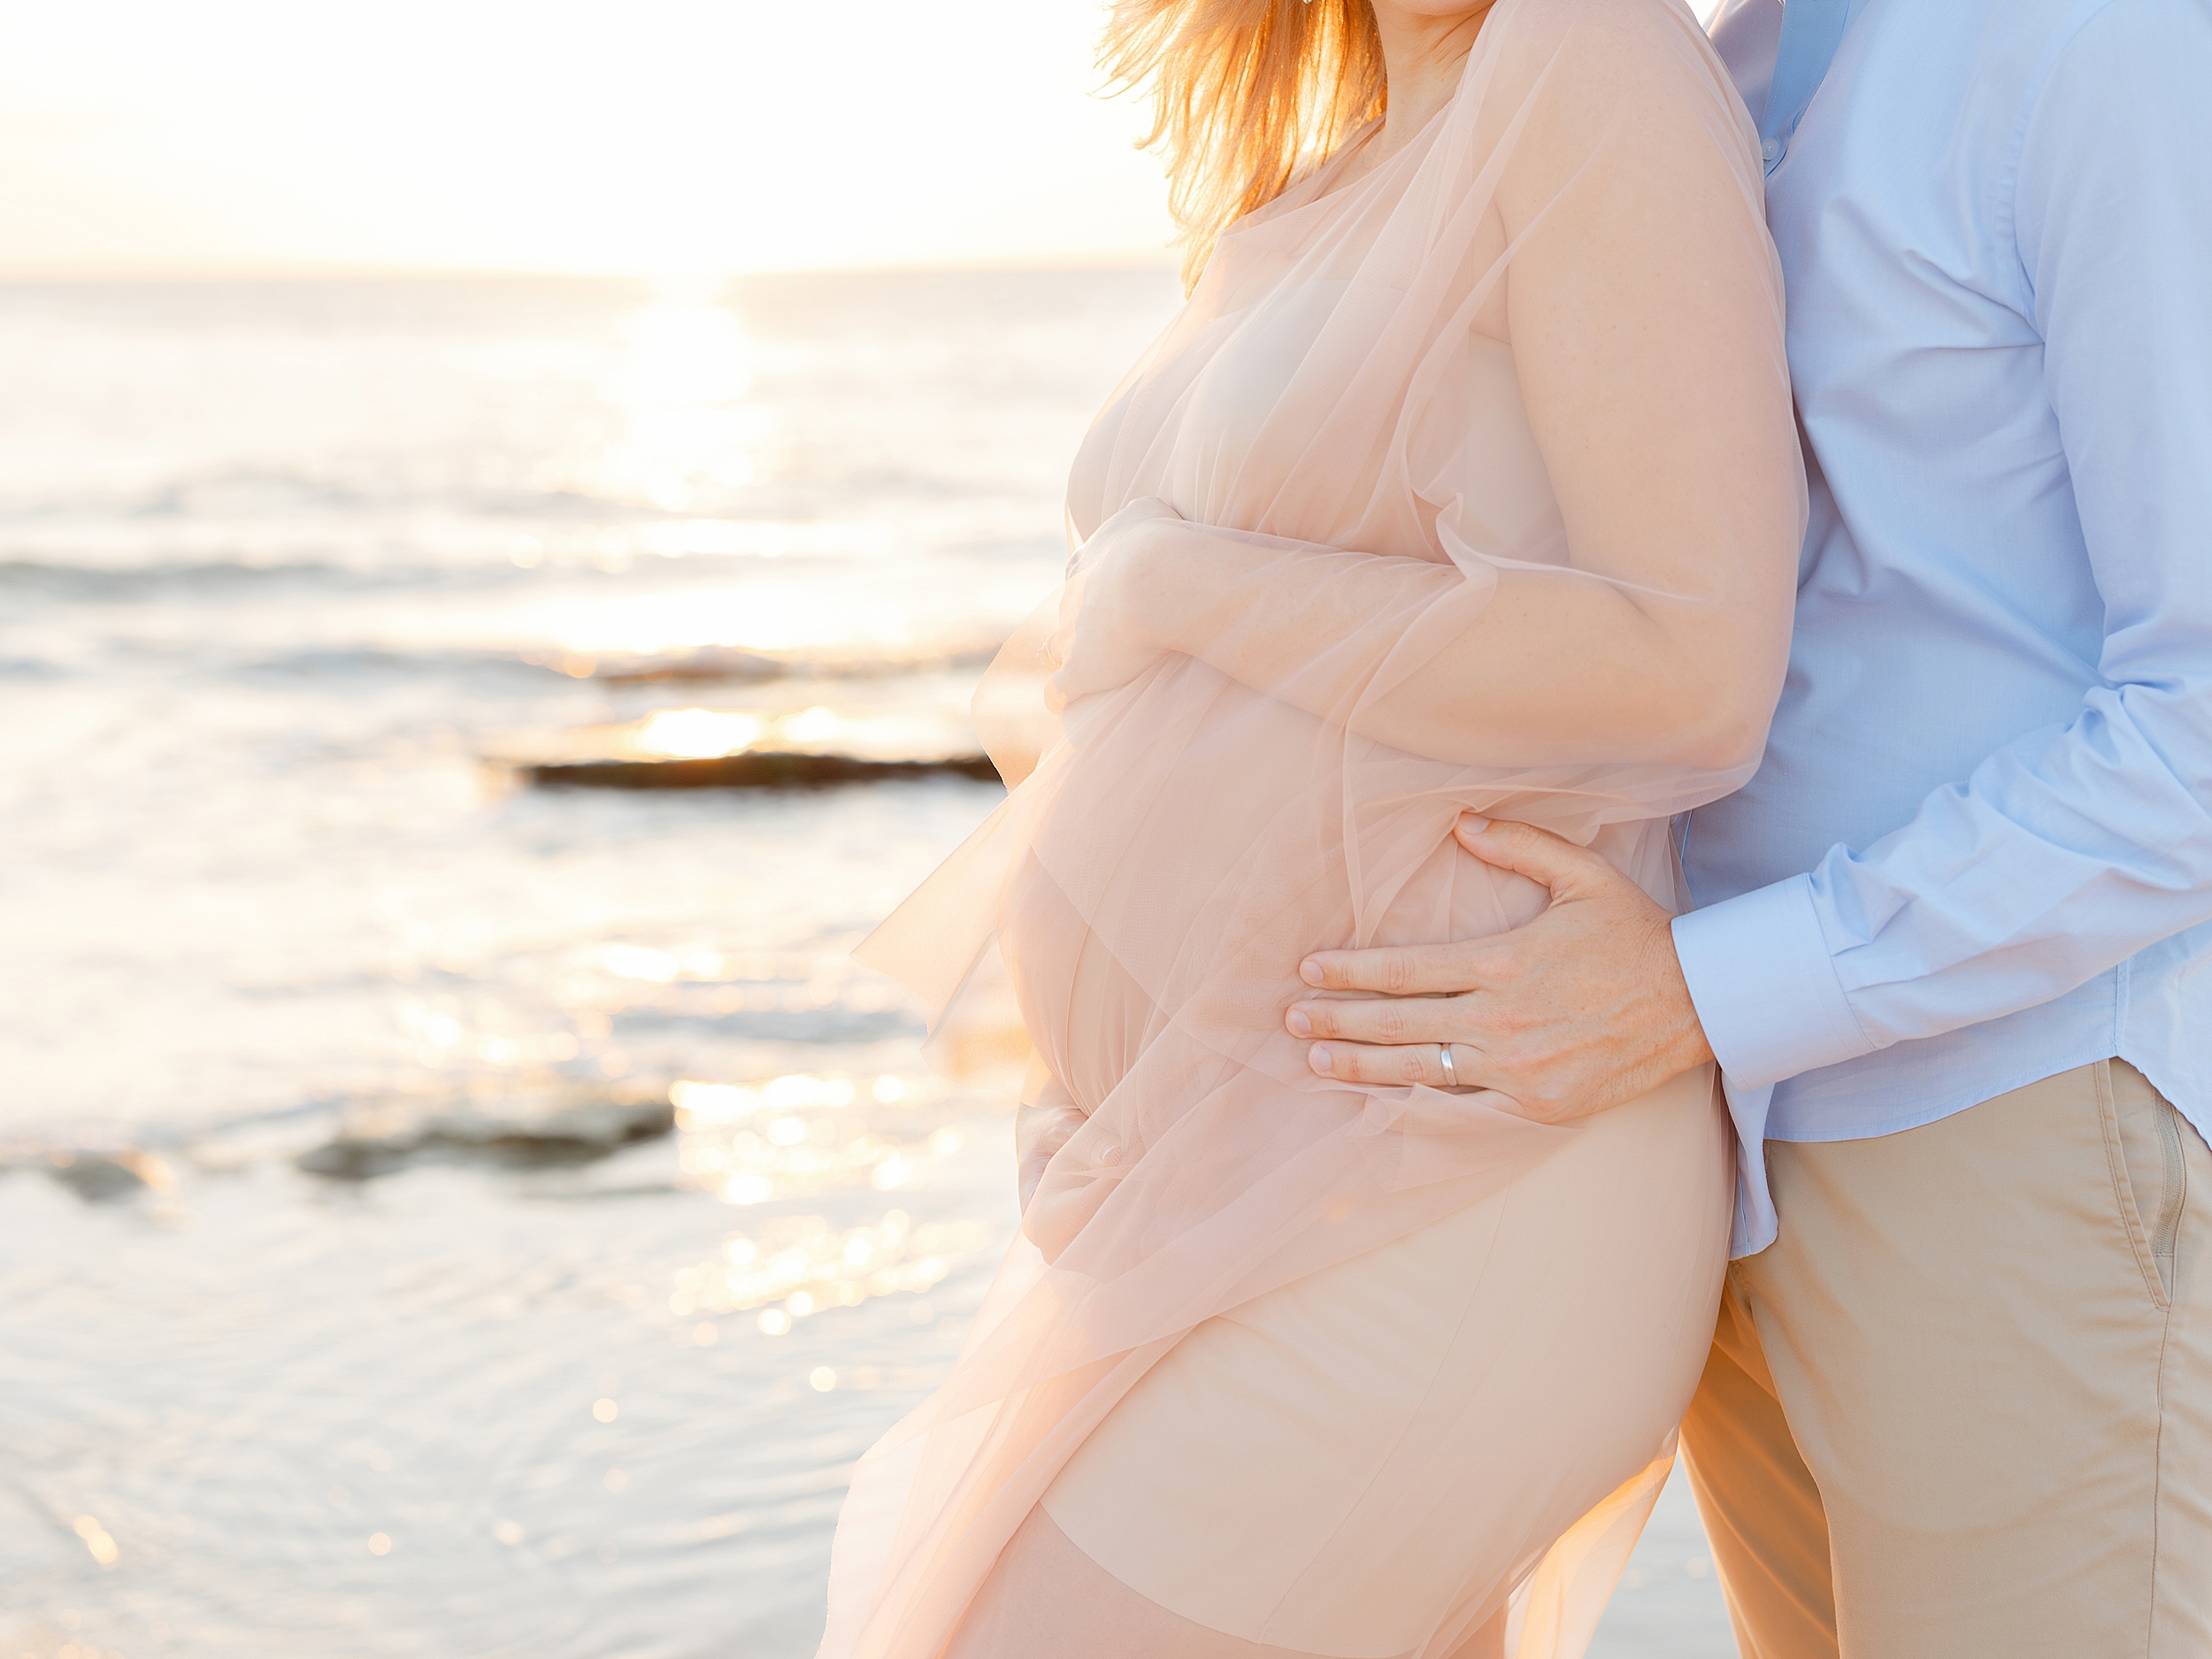 St. Augustine sunrise maternity session on the beach during an airy sunrise.